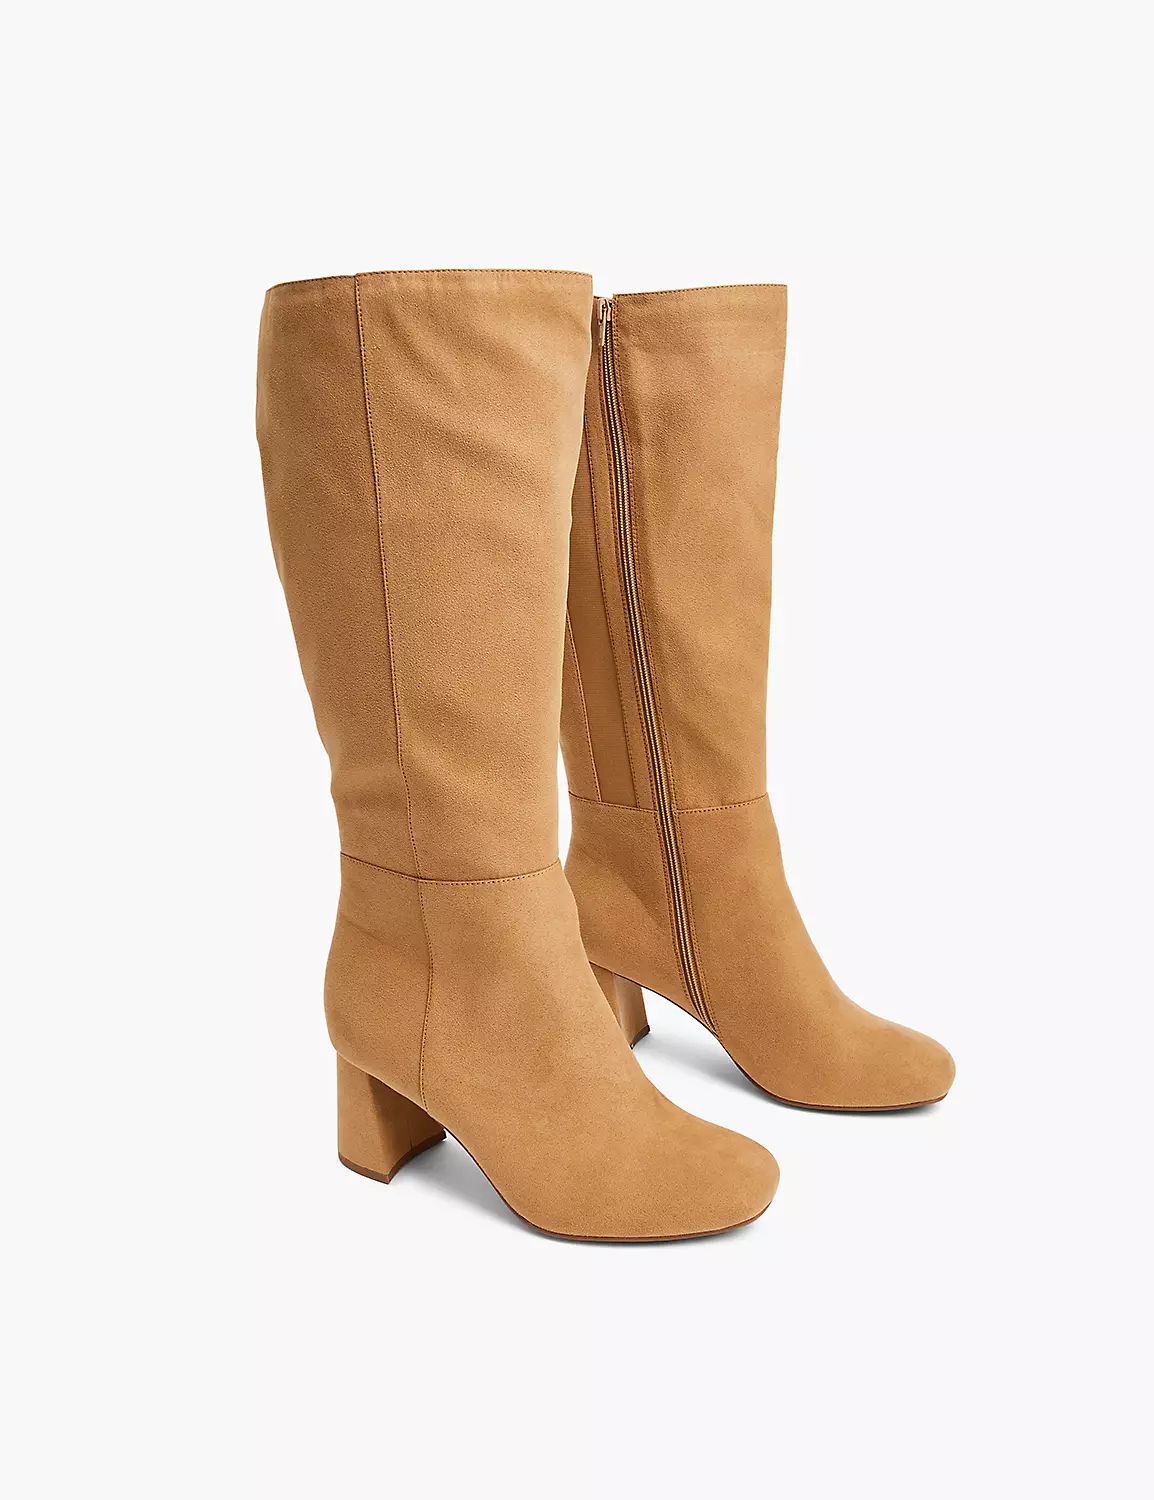 Dream Cloud Faux-Suede Tall Boot | LaneBryant | Lane Bryant (US)